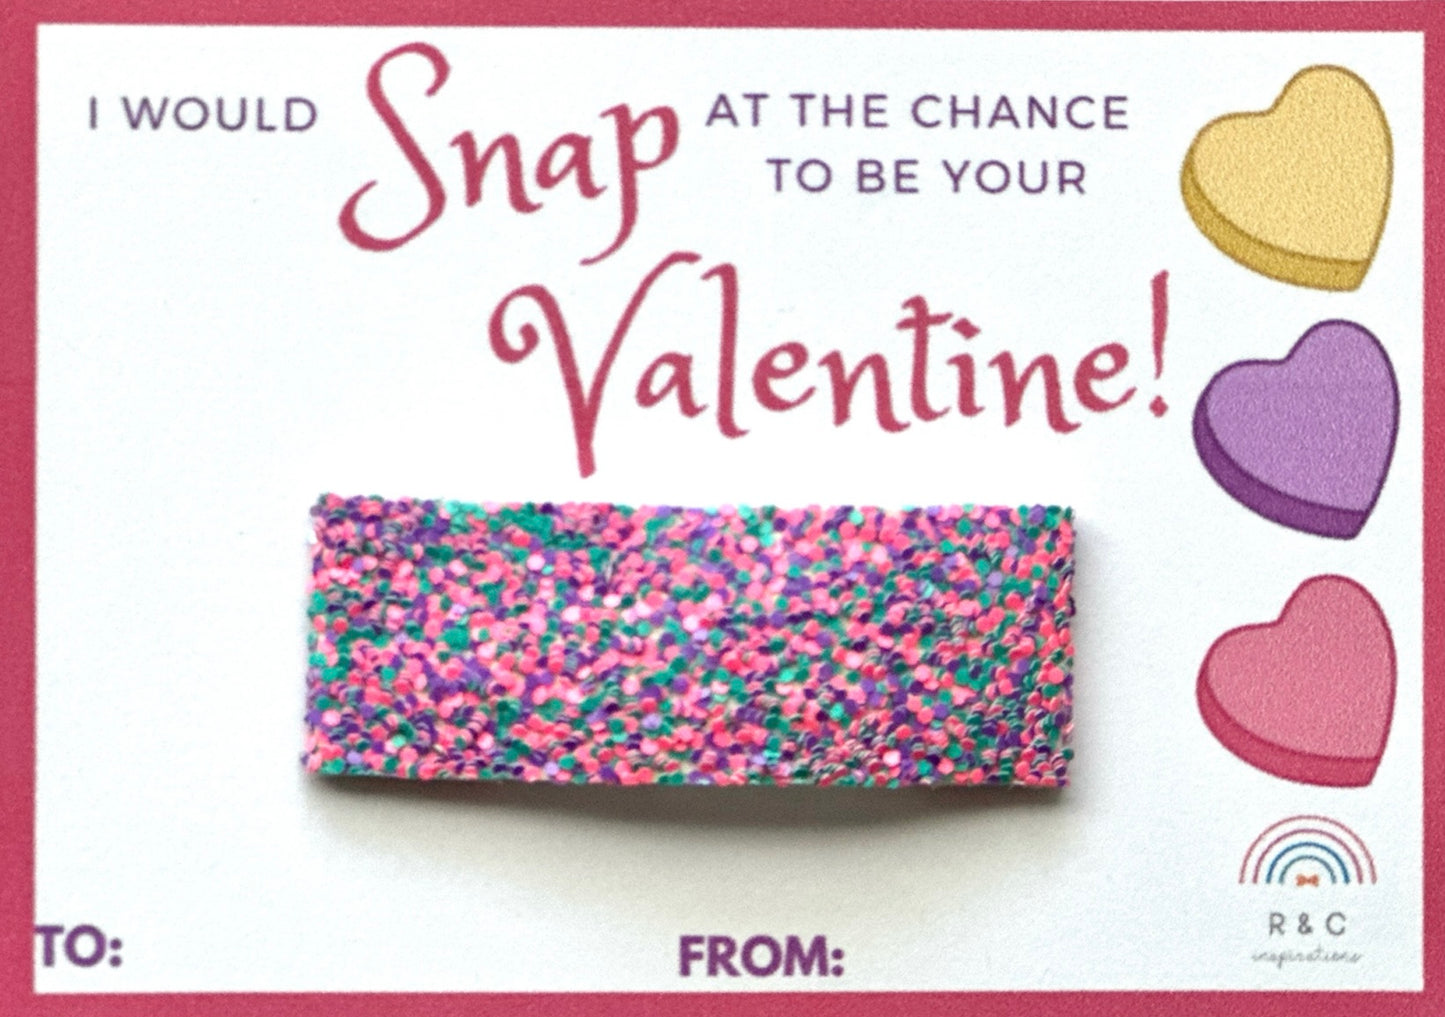 I would SNAP at the chance to be your Valentine